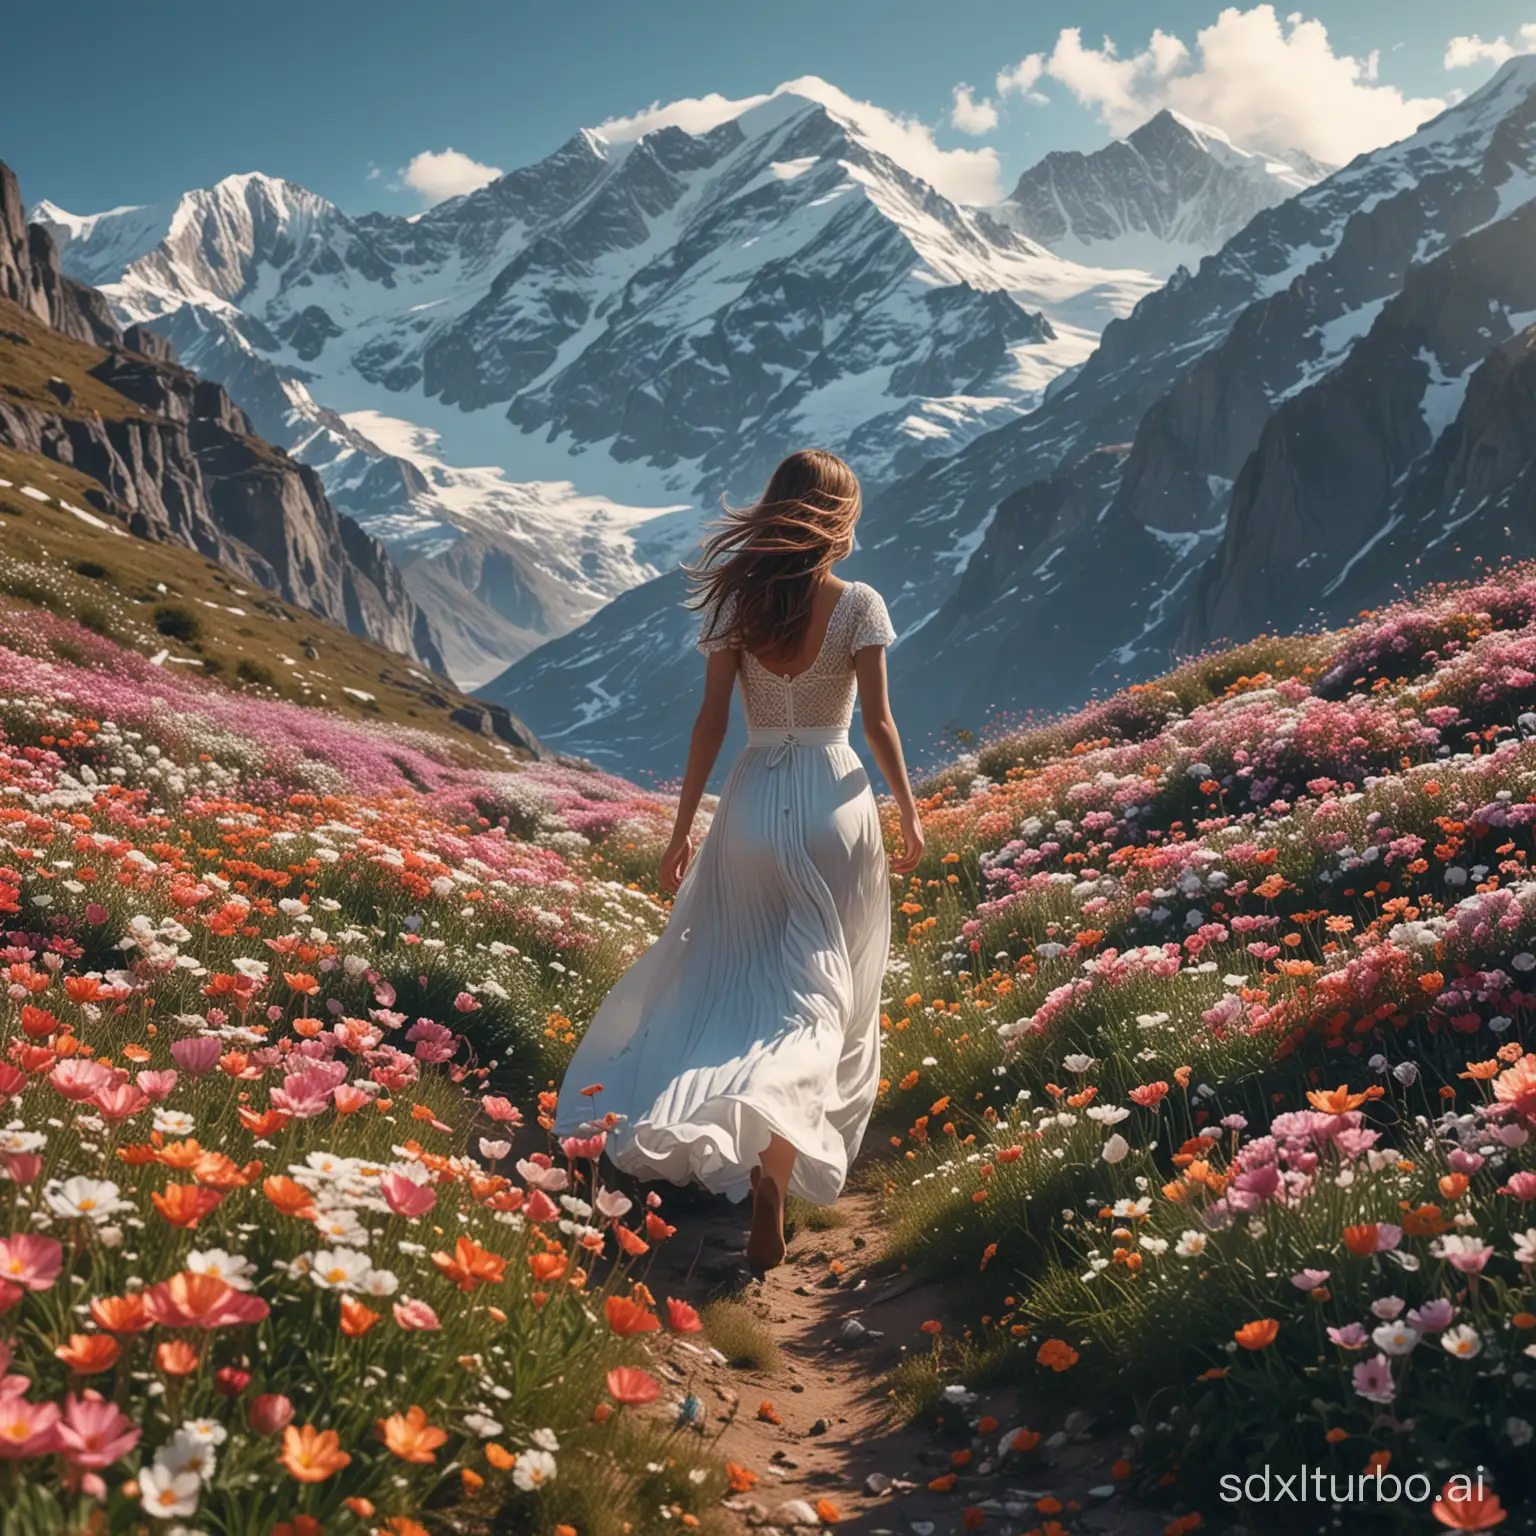 Beautiful-Girl-Running-Among-Flowers-with-SnowCapped-Mountains-in-the-Background